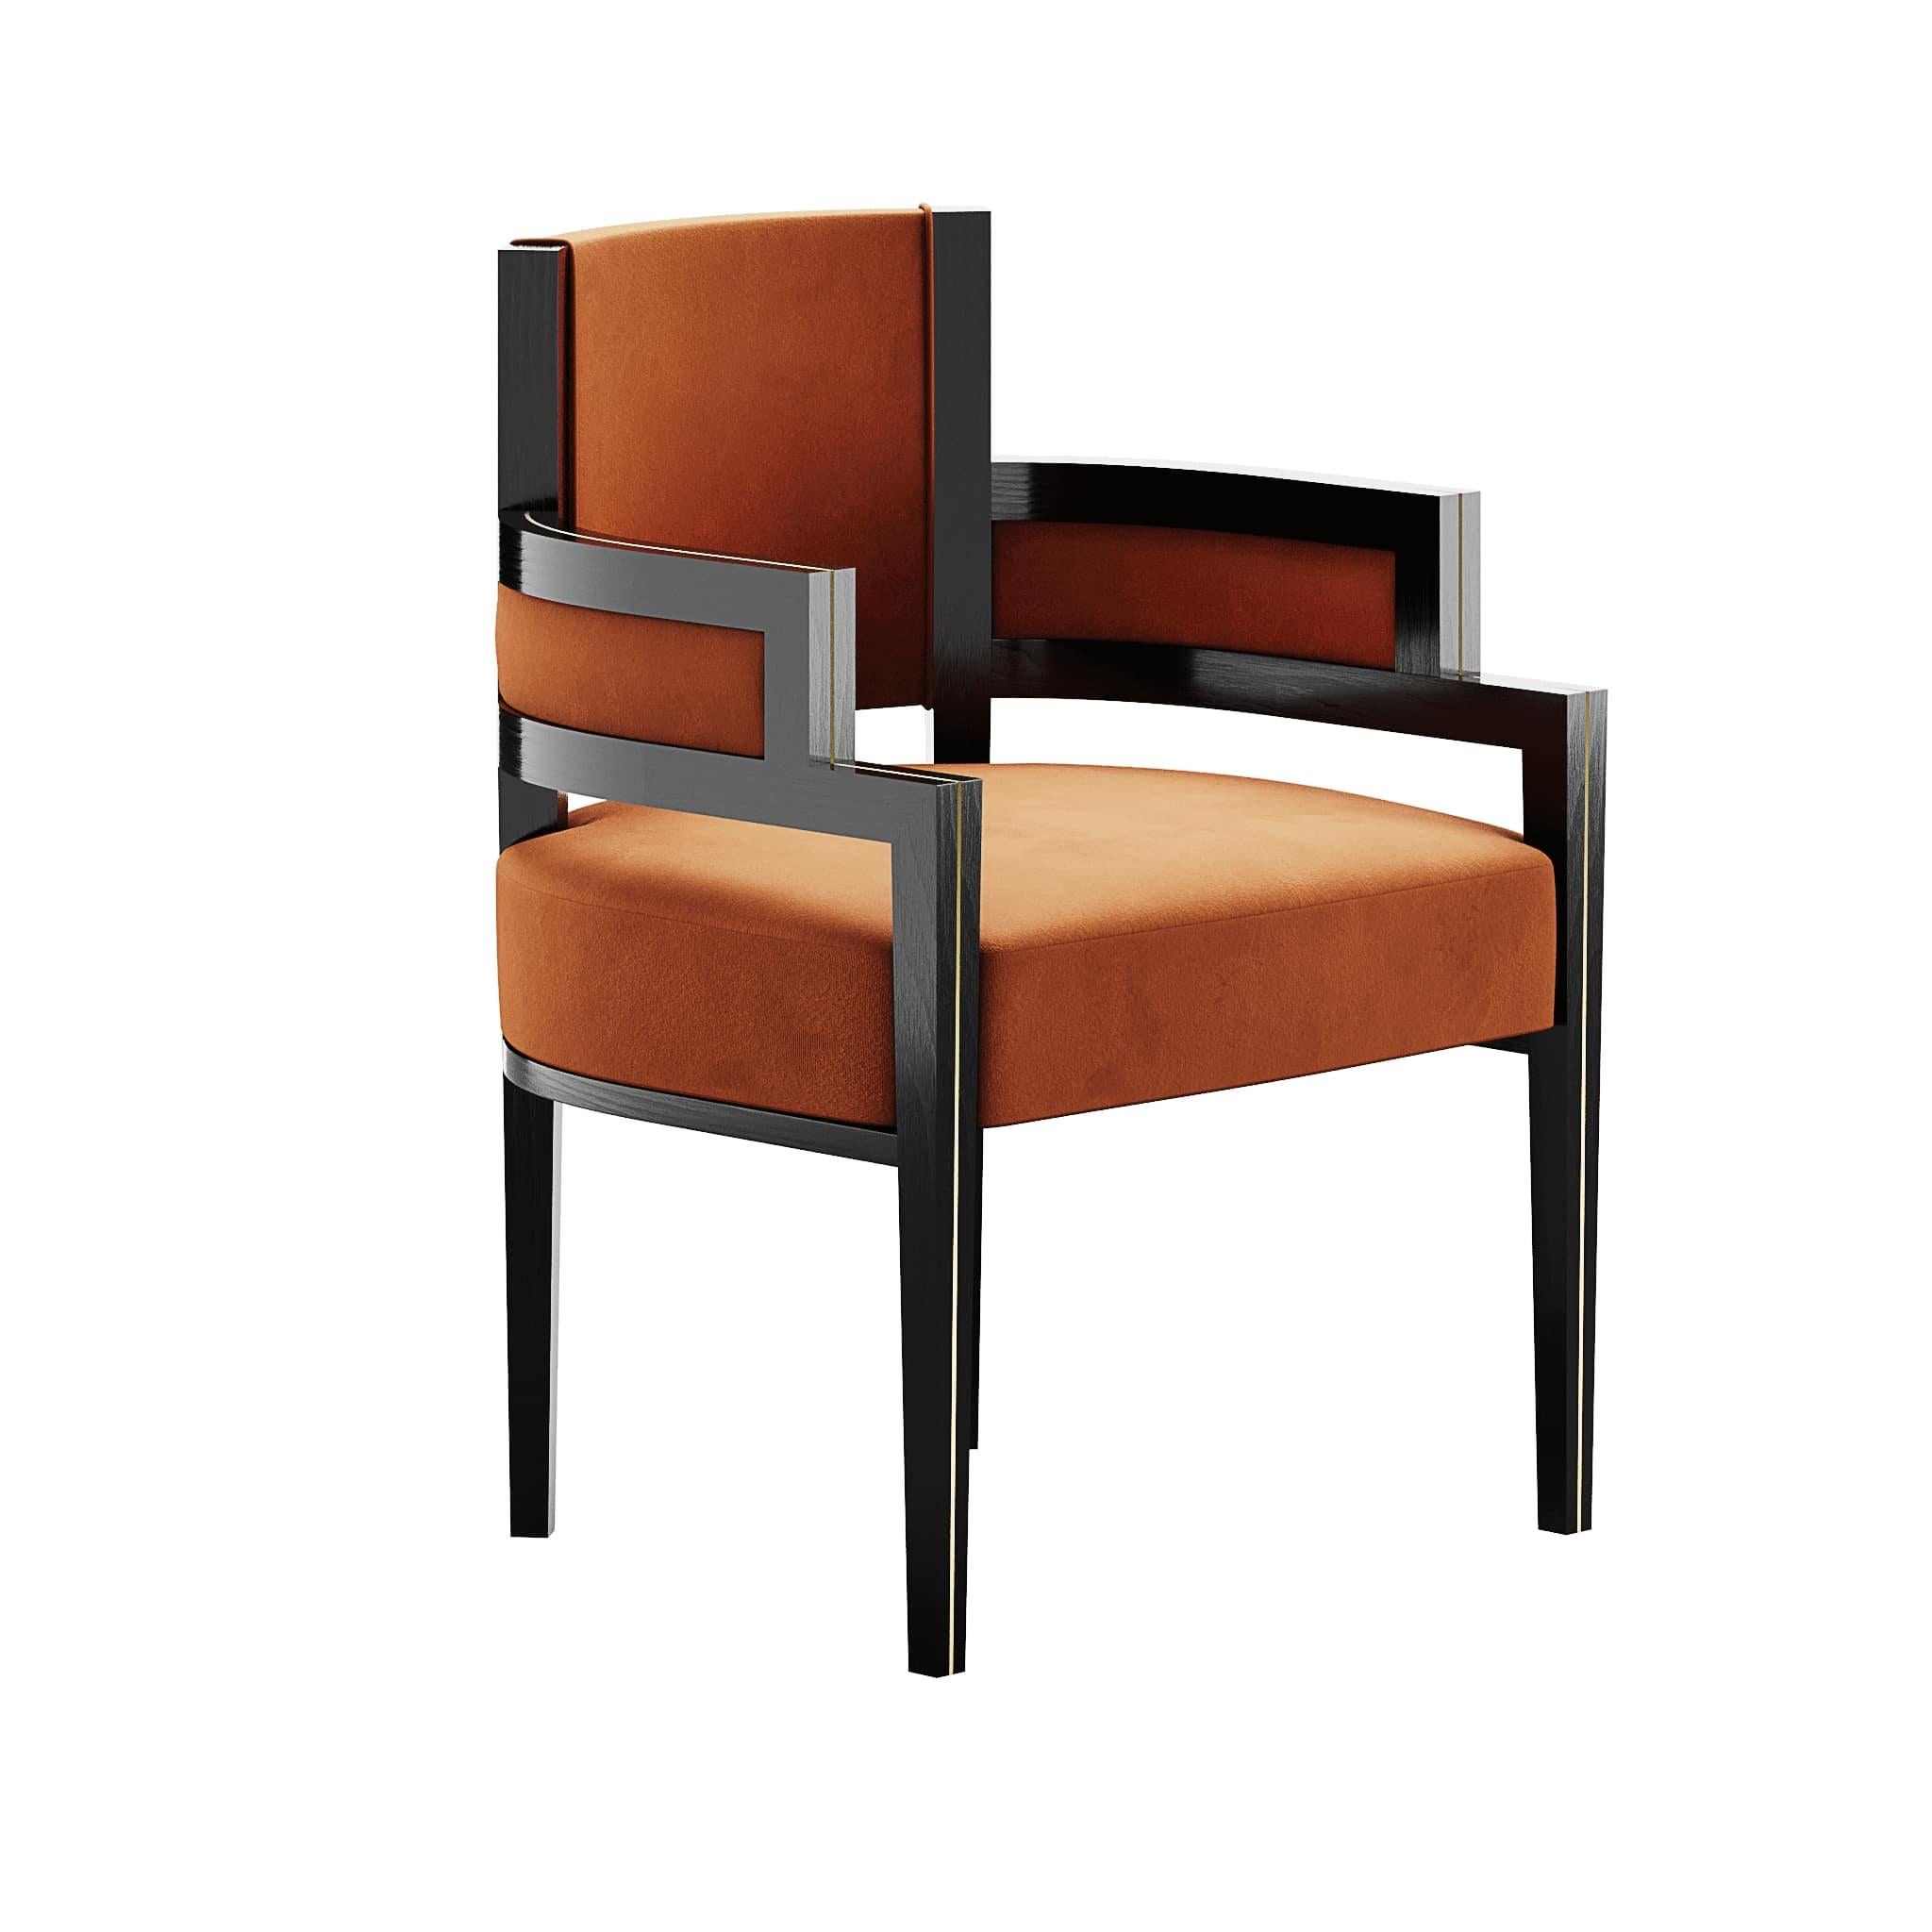 Pina Chair Iron is an Art Deco-style dining chair whose shape provides the best comfort for guests—upholstered in warm orange velvet with a modern wood structure. Perfect for modern dining room projects that aim for a classic-chic vibe.

Materials: